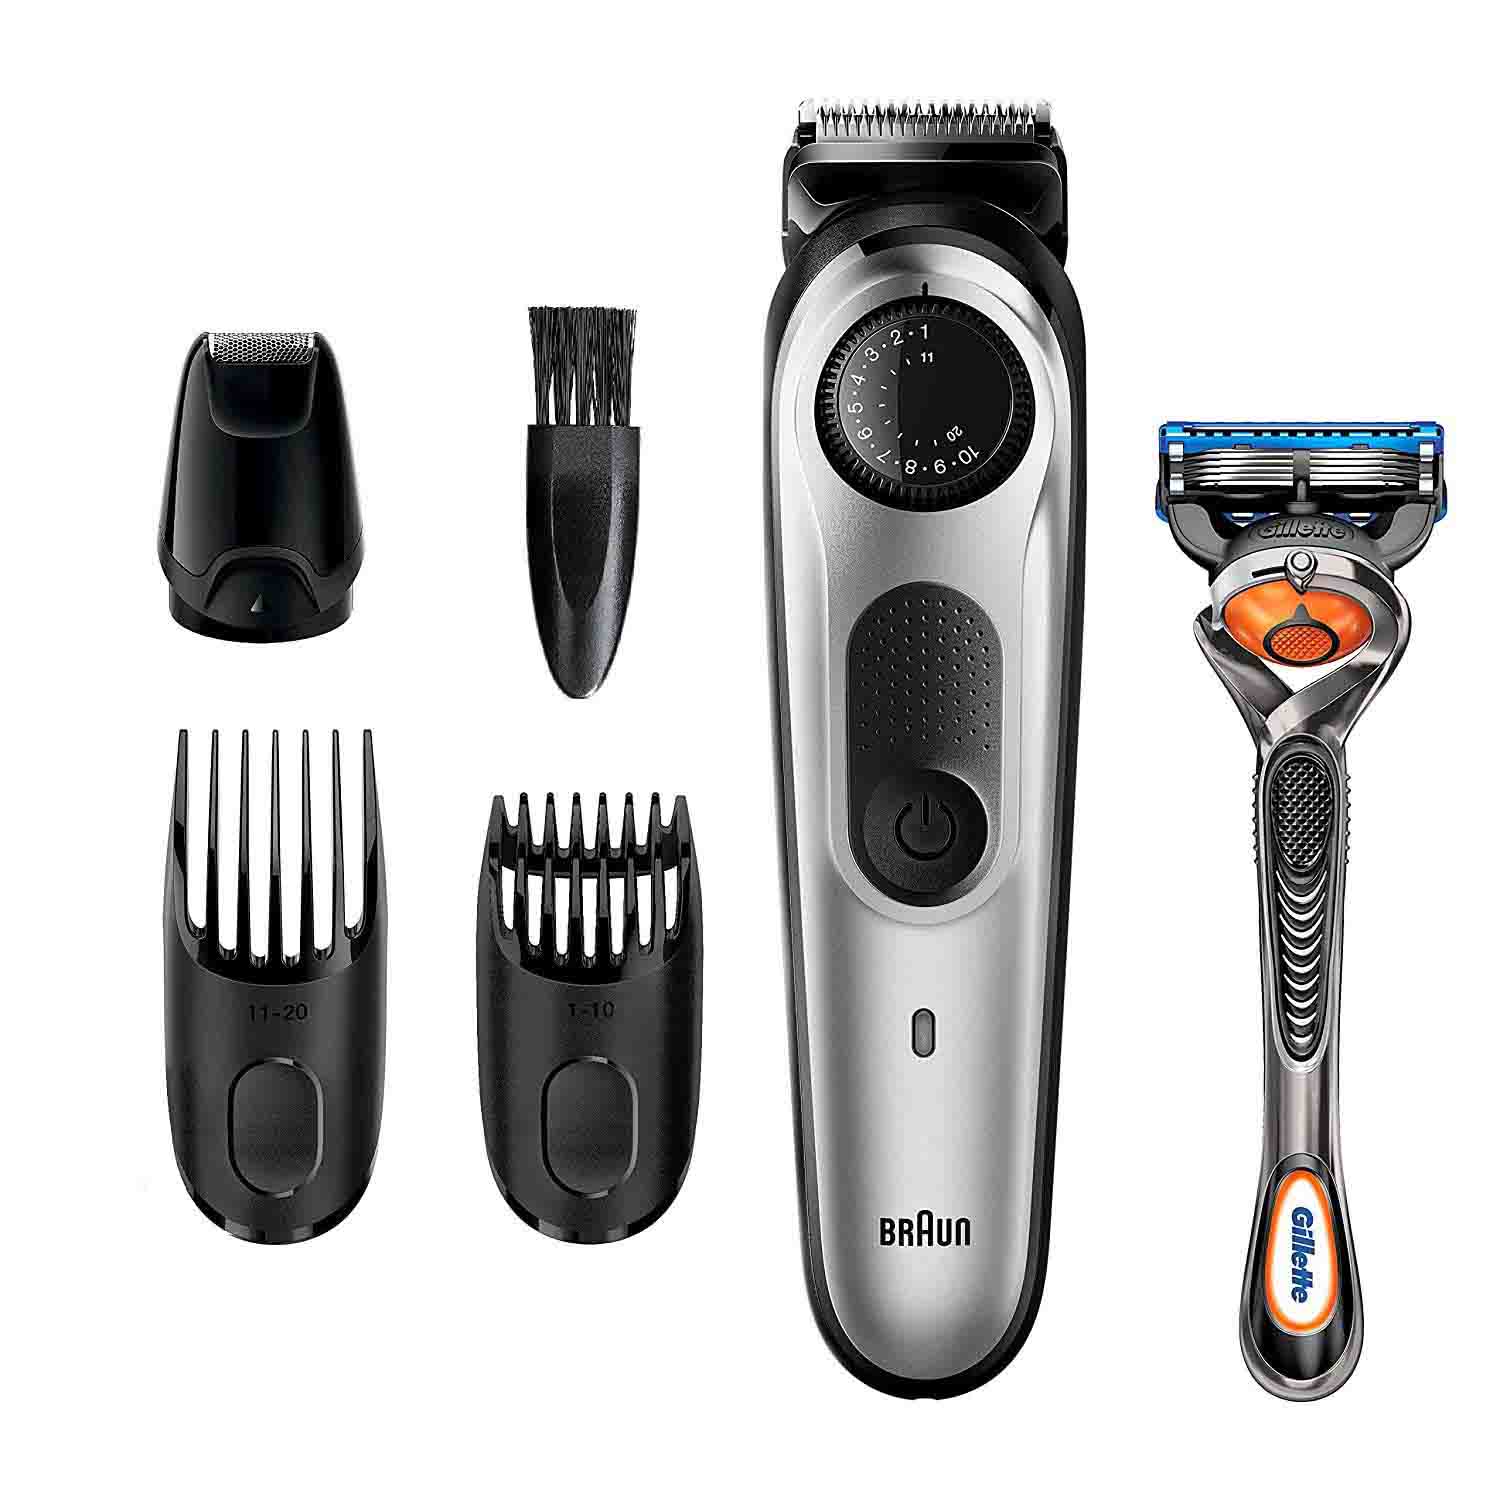 Braun BT5265 Cordless Hair Beard Trimmer with razor and attachments